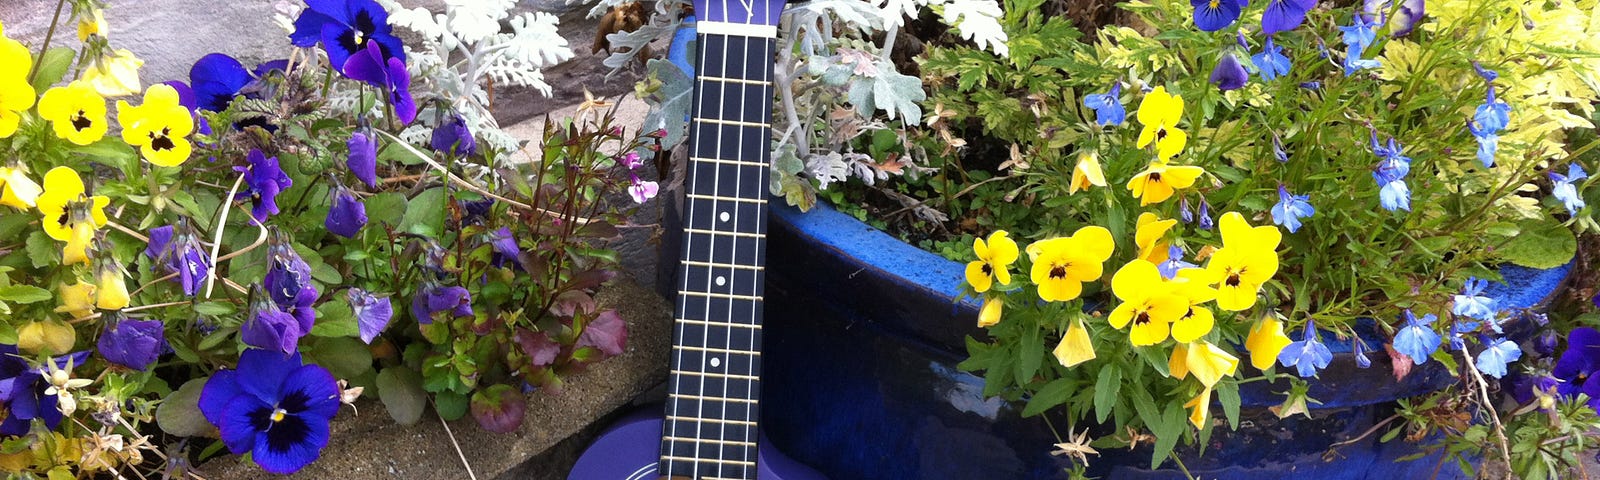 A blue ukulele rests against some pots with blue and yellow flowers in them.